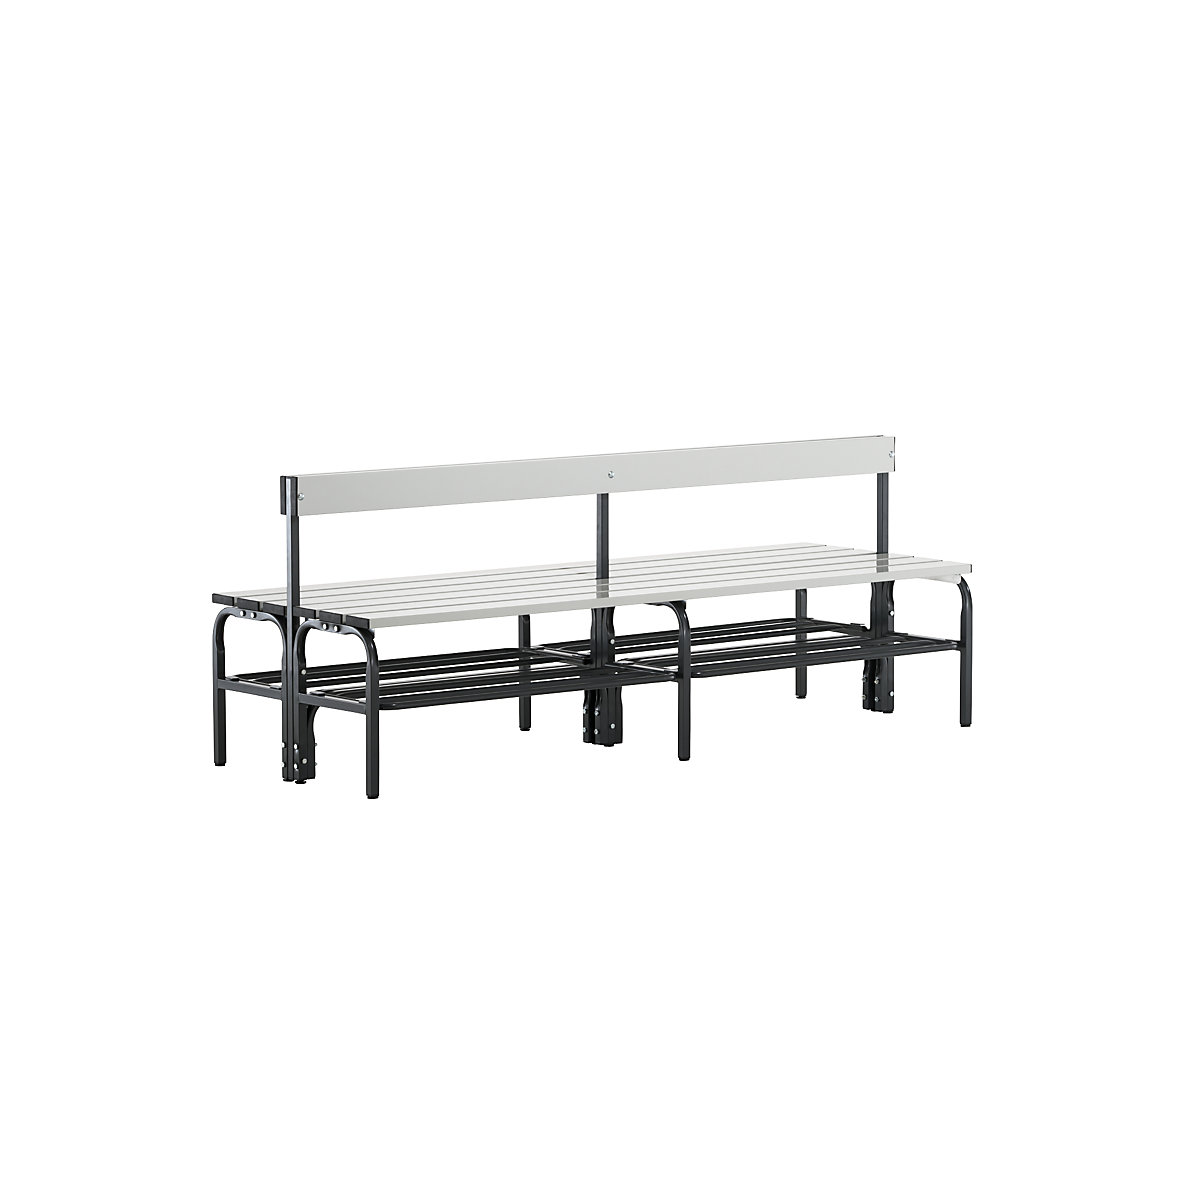 Half height cloakroom bench with back rest, double sided – Sypro, aluminium, length 1500 mm, charcoal, shoe rack